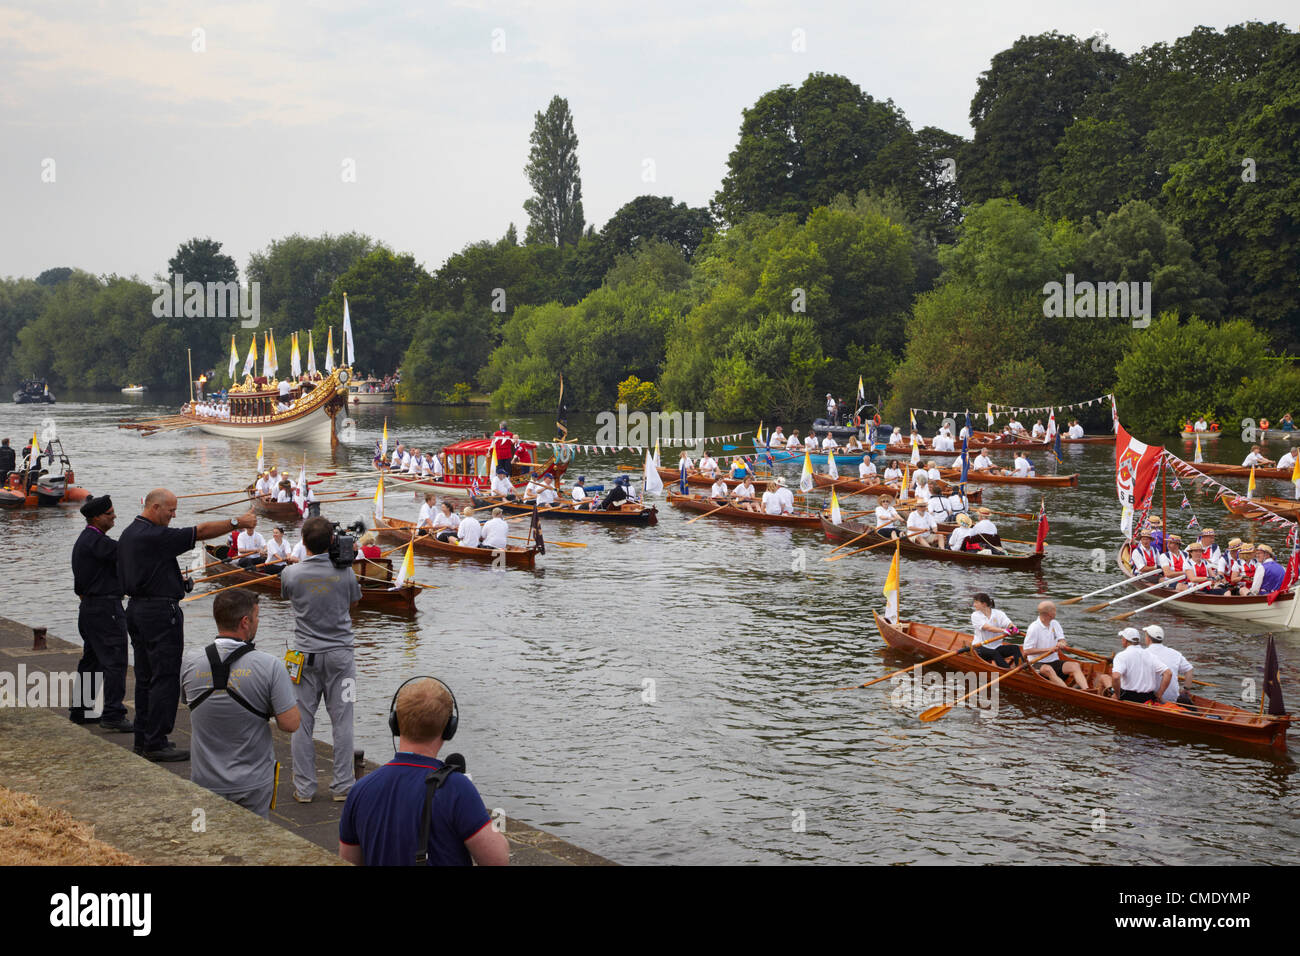 Friday 27 July, 2012. Flotilla of boats following the Gloriana rowbarge carrying the Olympic Flame on River Thames at Hampton Court on its way to London.  England. Credit:  Cephas Picture Library / Alamy Live News. Stock Photo